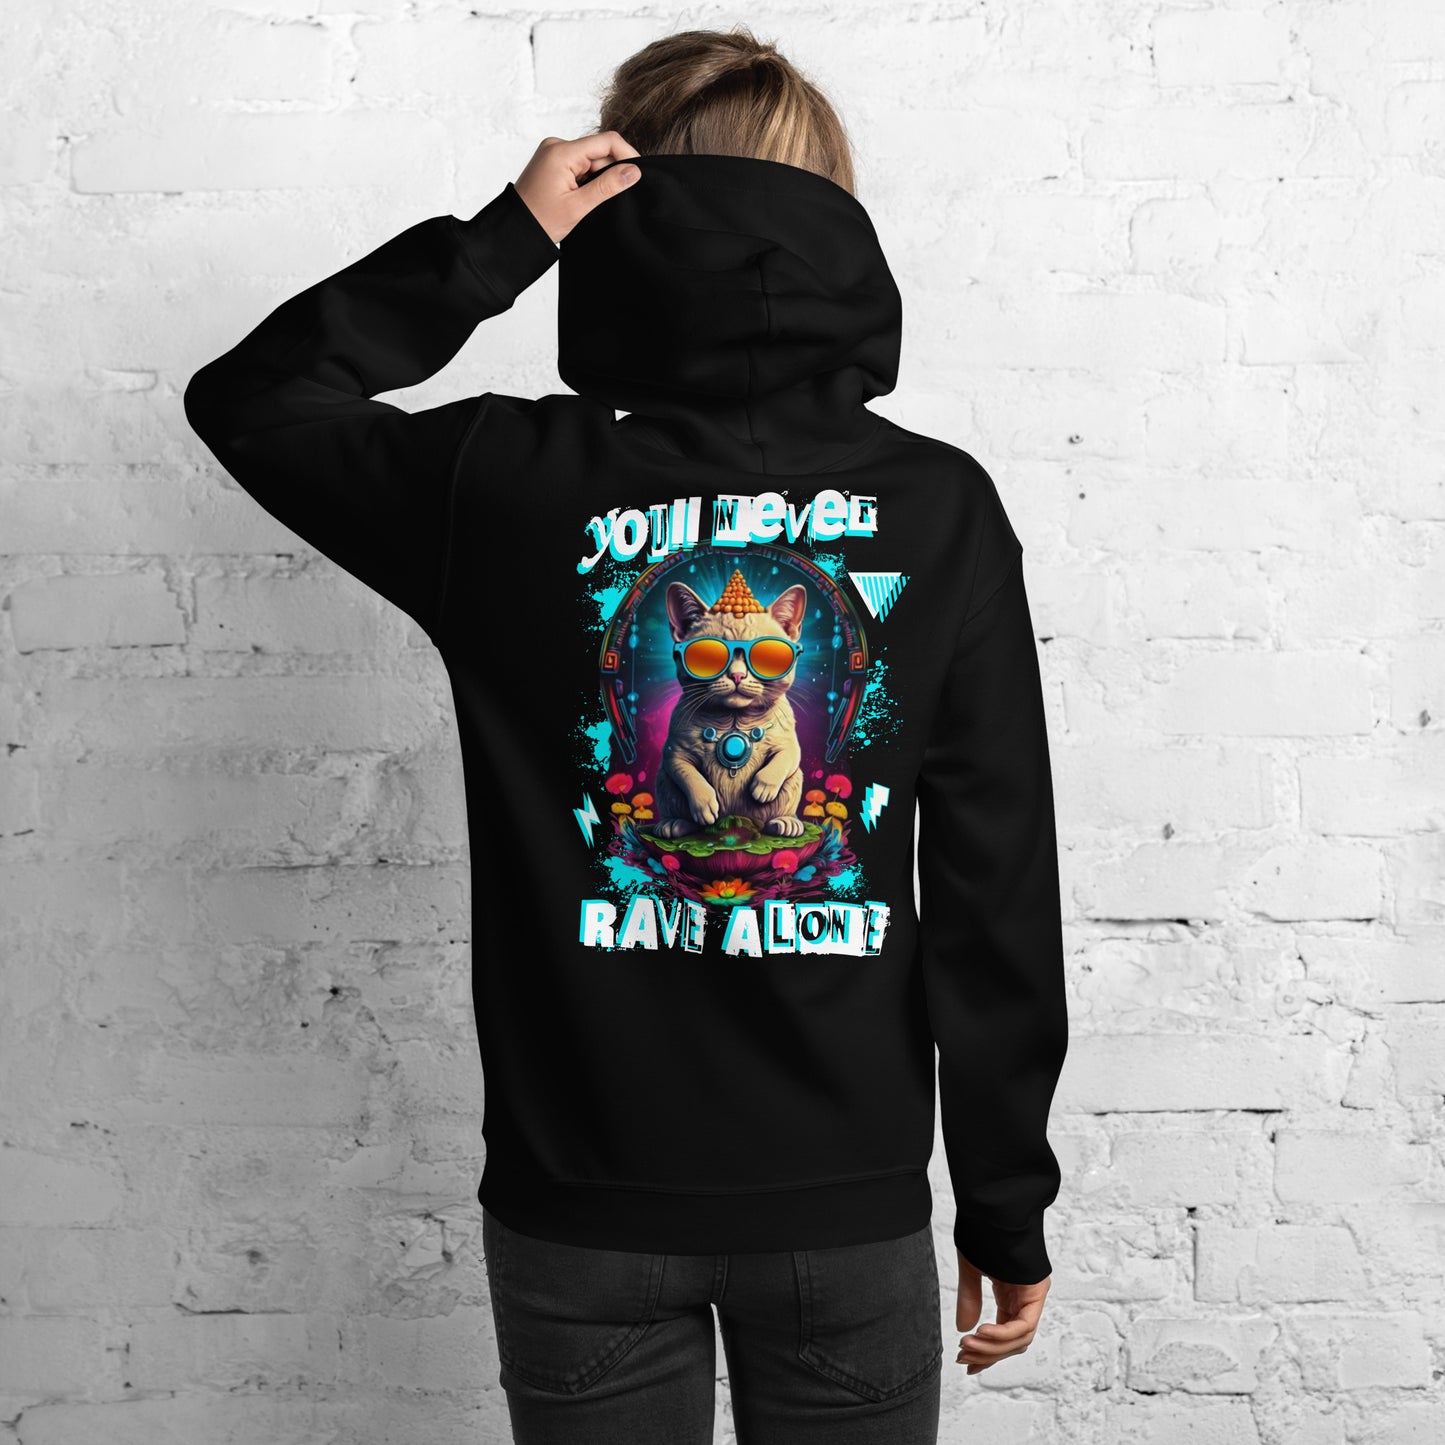 You'll never rave alone - Unisex Hoodie